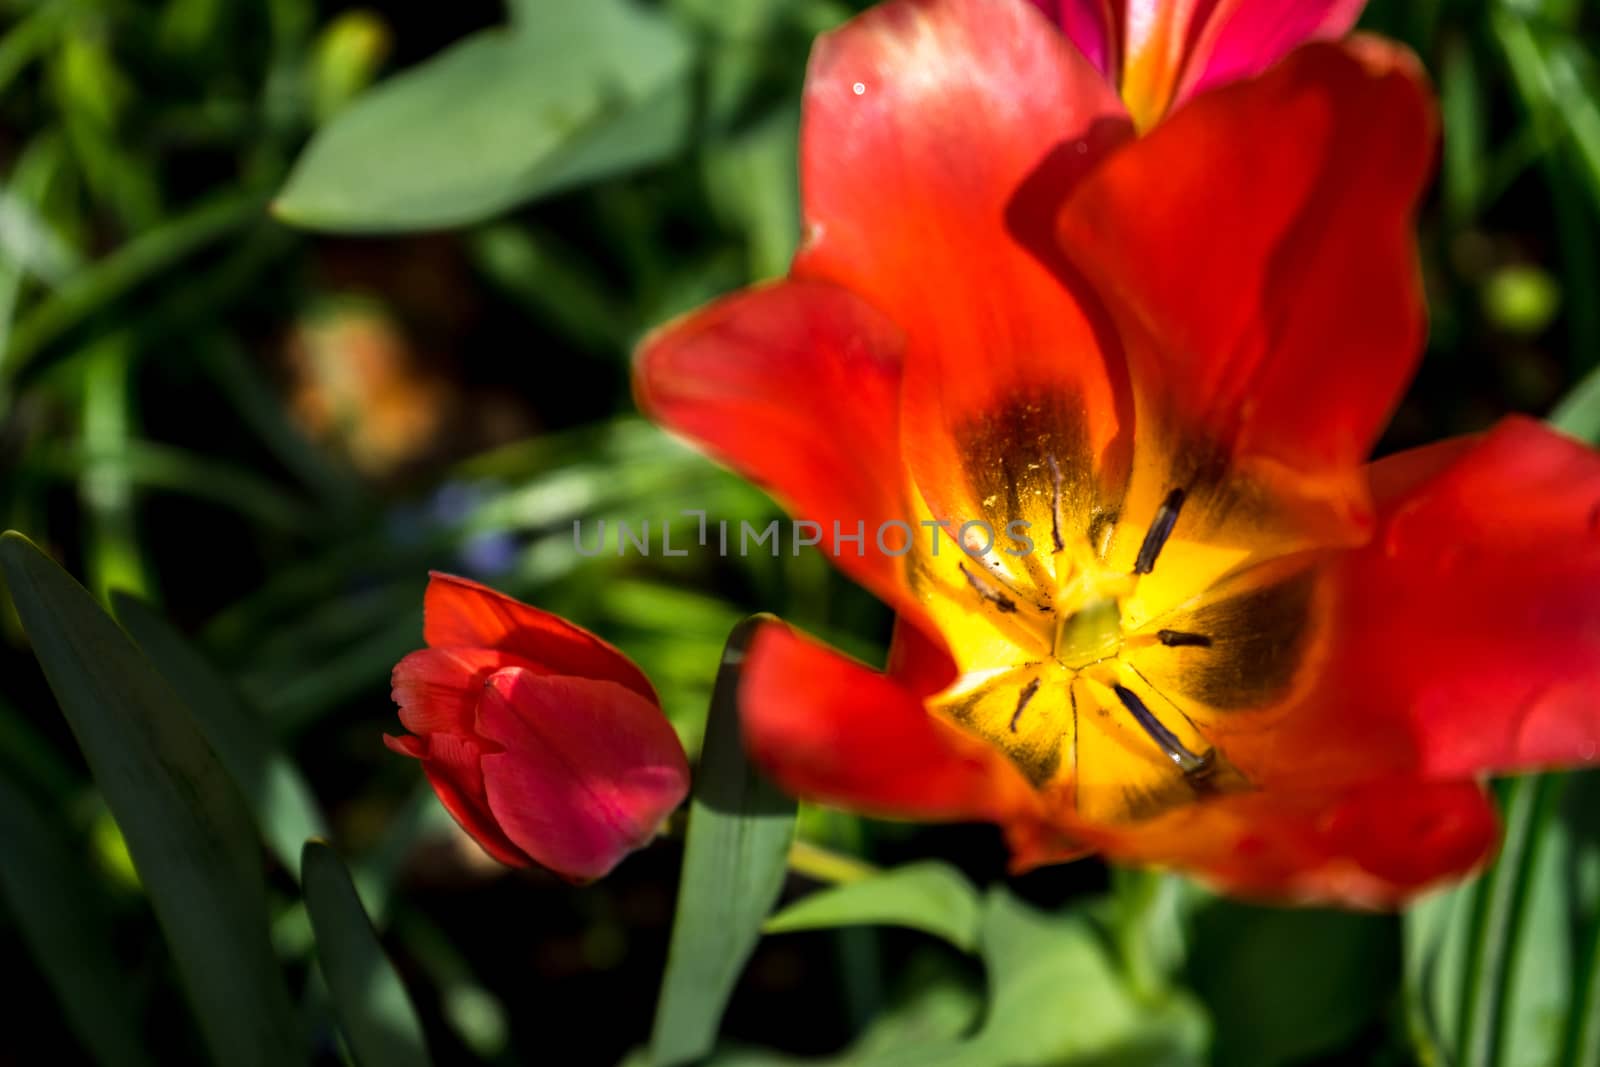 Colourful Tulips with a beautiful background by ramana16